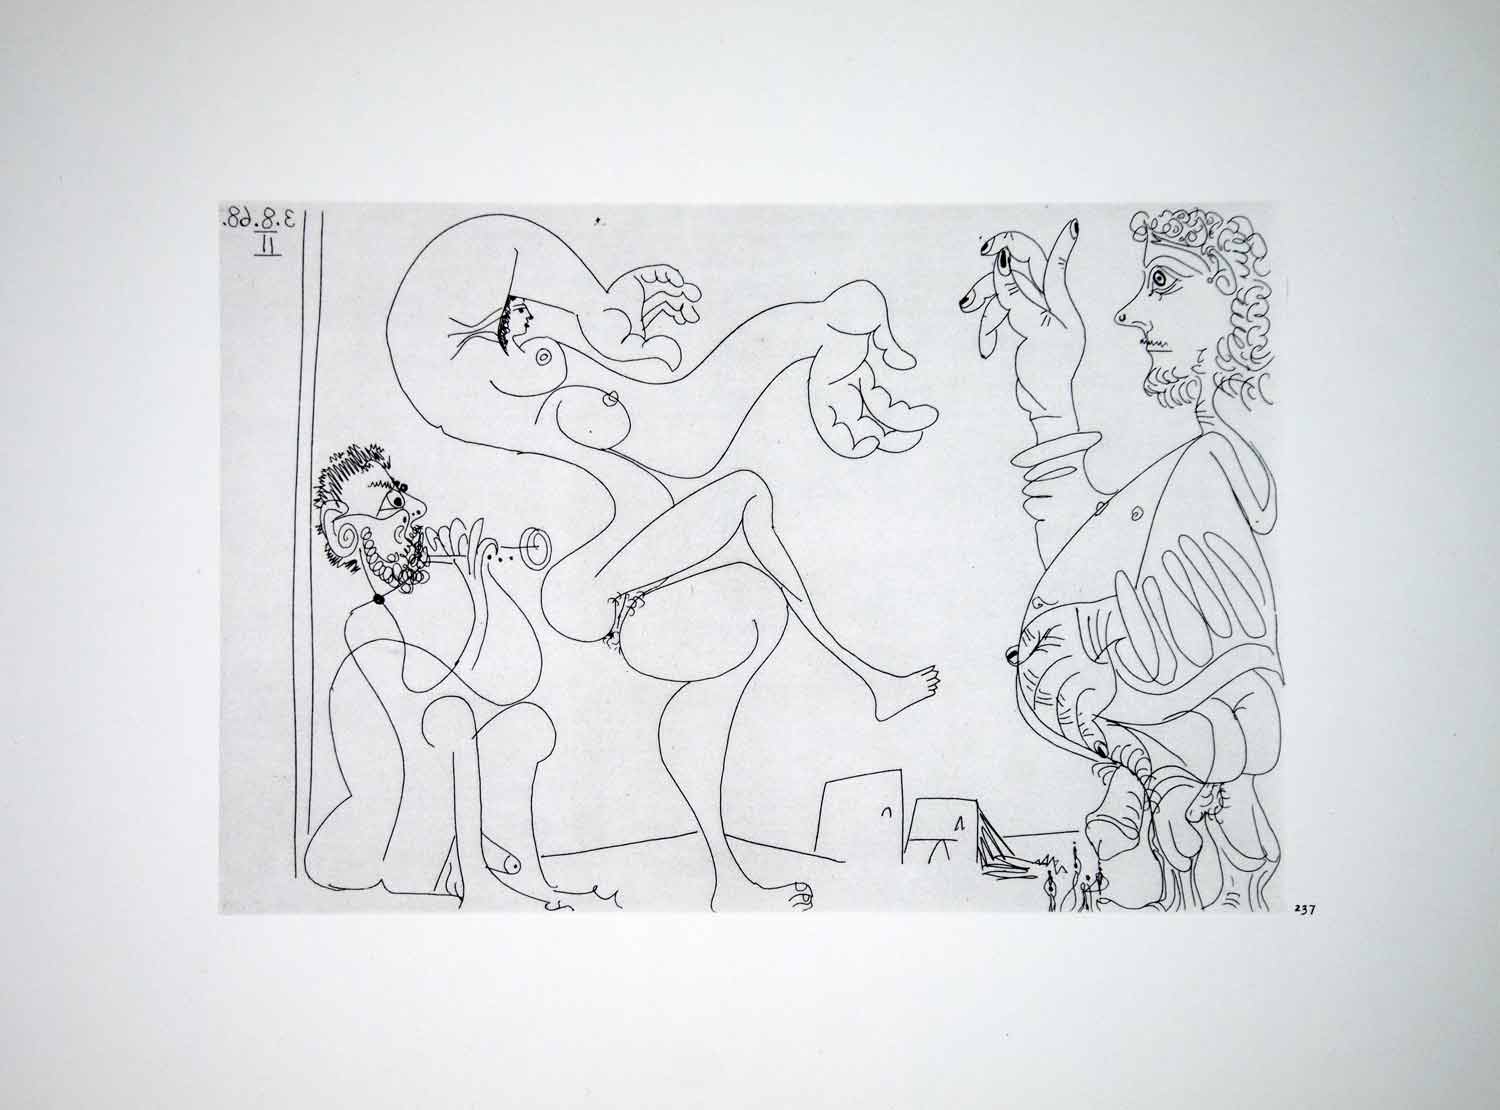 1970 Heliogravure Picasso Abstract Nude Female Dancing Male Panpipe Music P347B